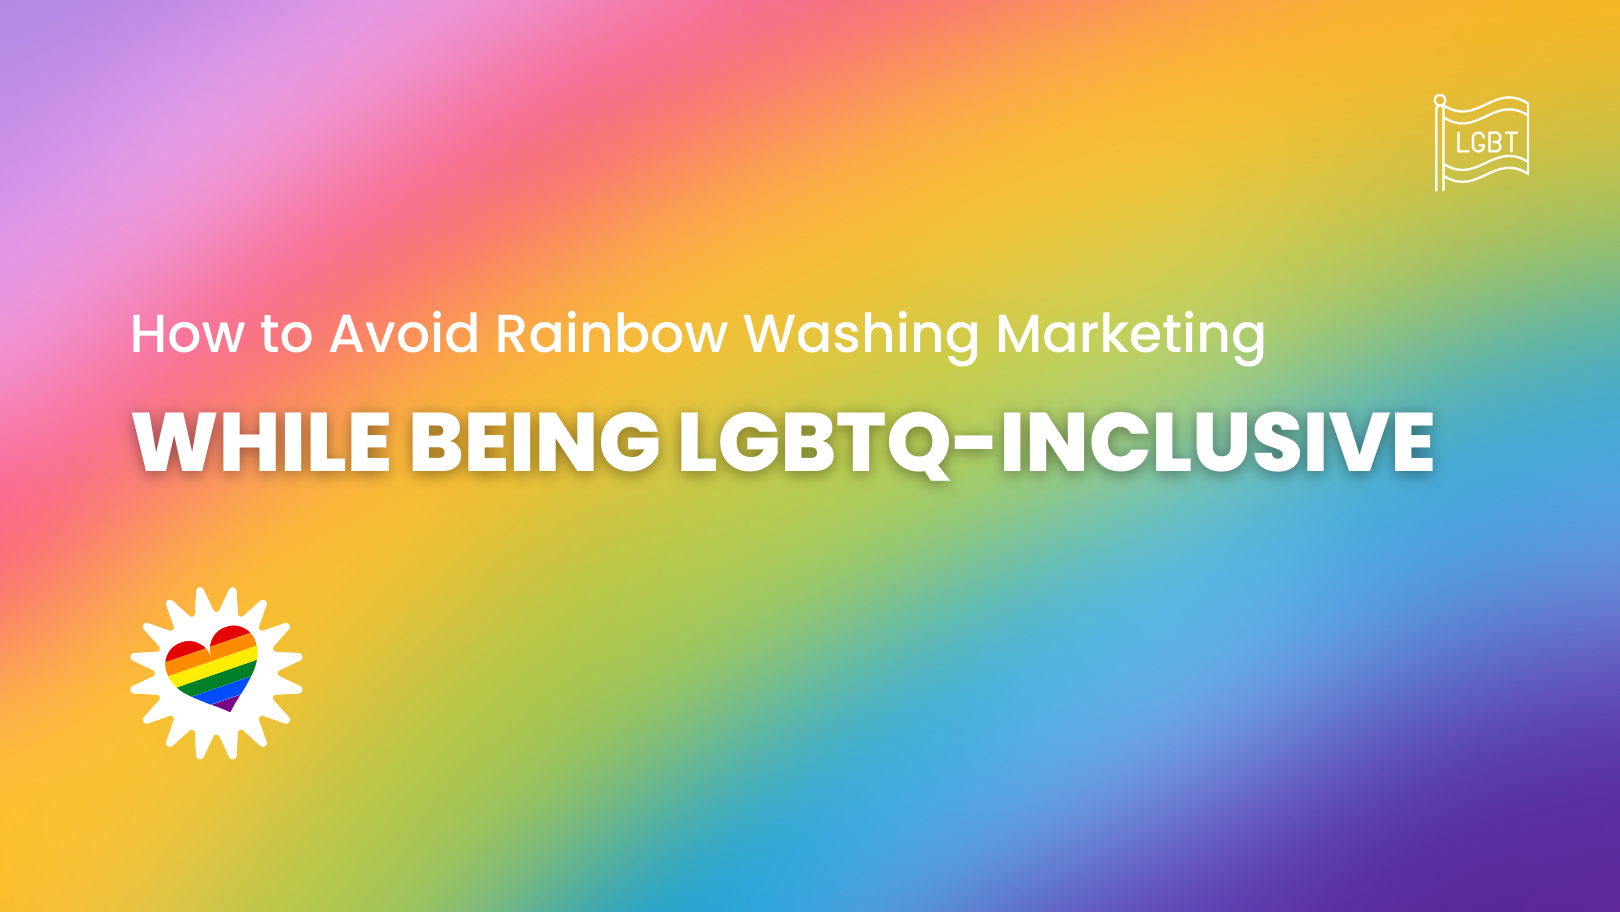 How to Avoid Rainbow Washing Marketing While Being LGBTQ-Inclusive